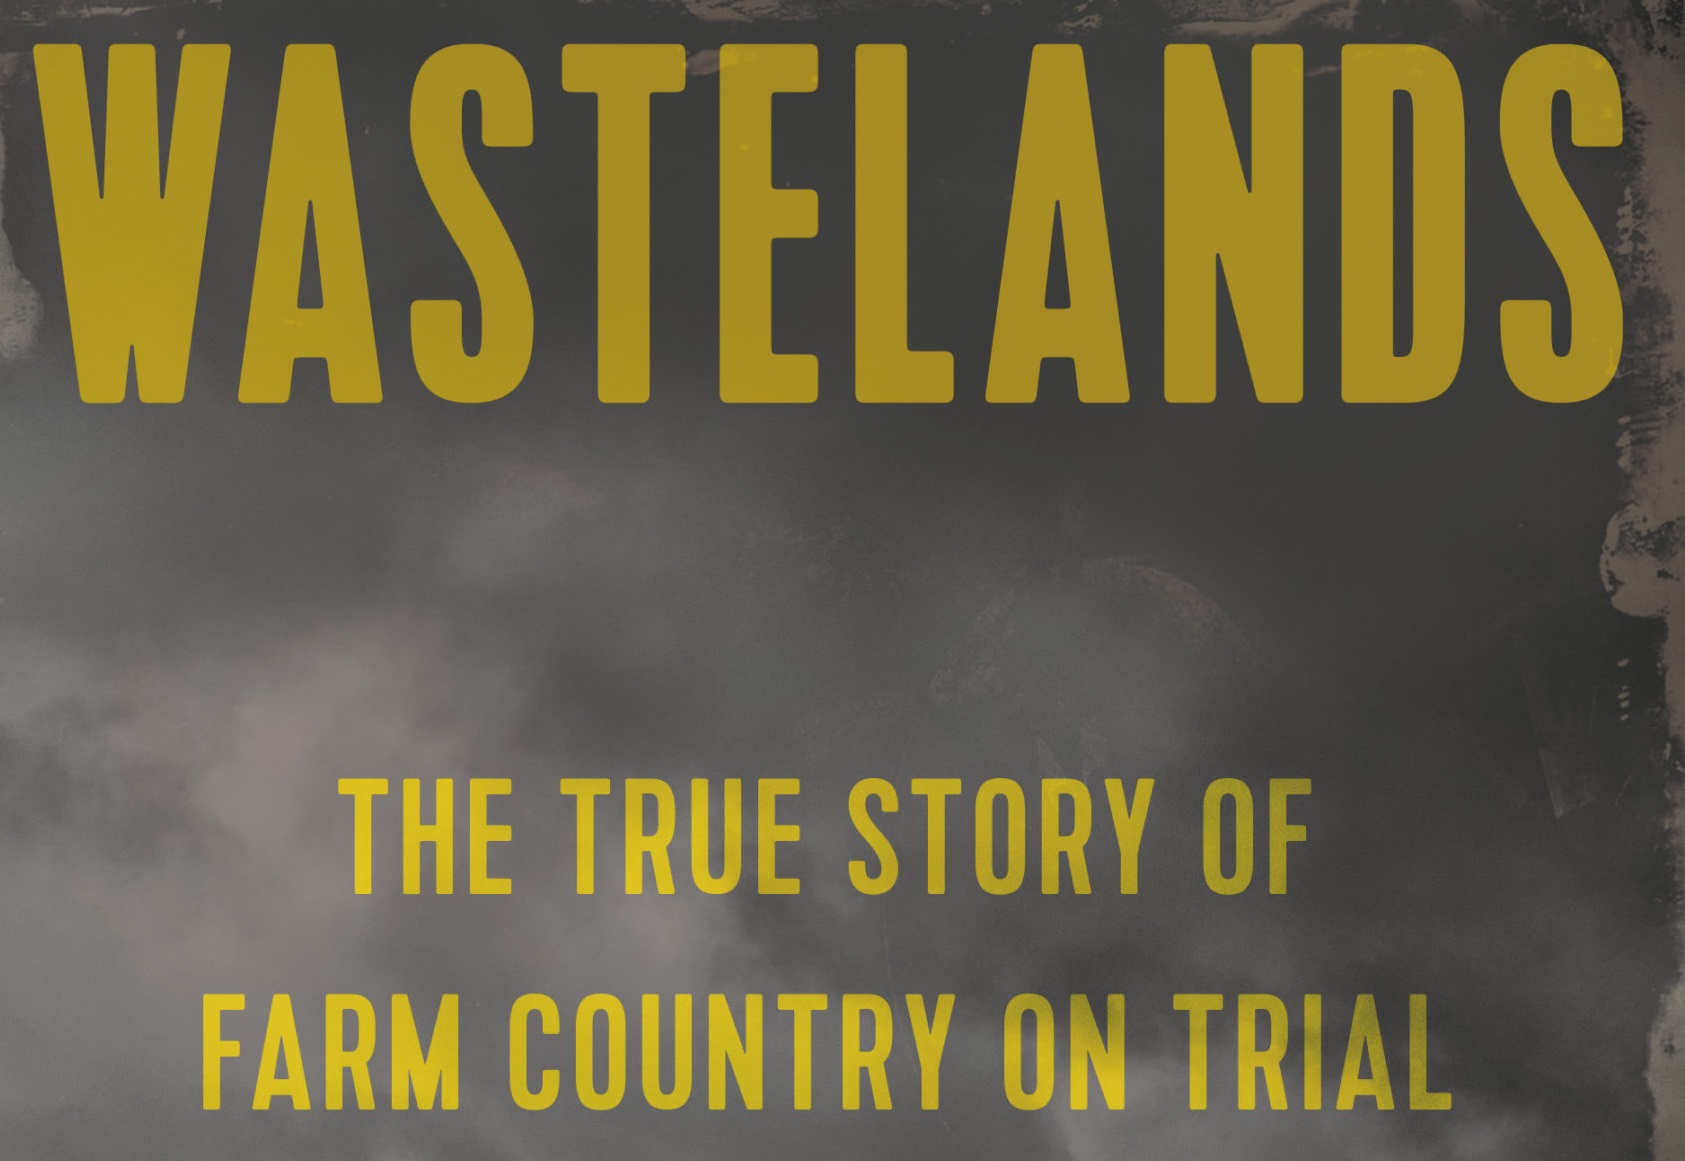 Dinner Disrupted: WASTELANDS: The True Story of Farm Country on Trial